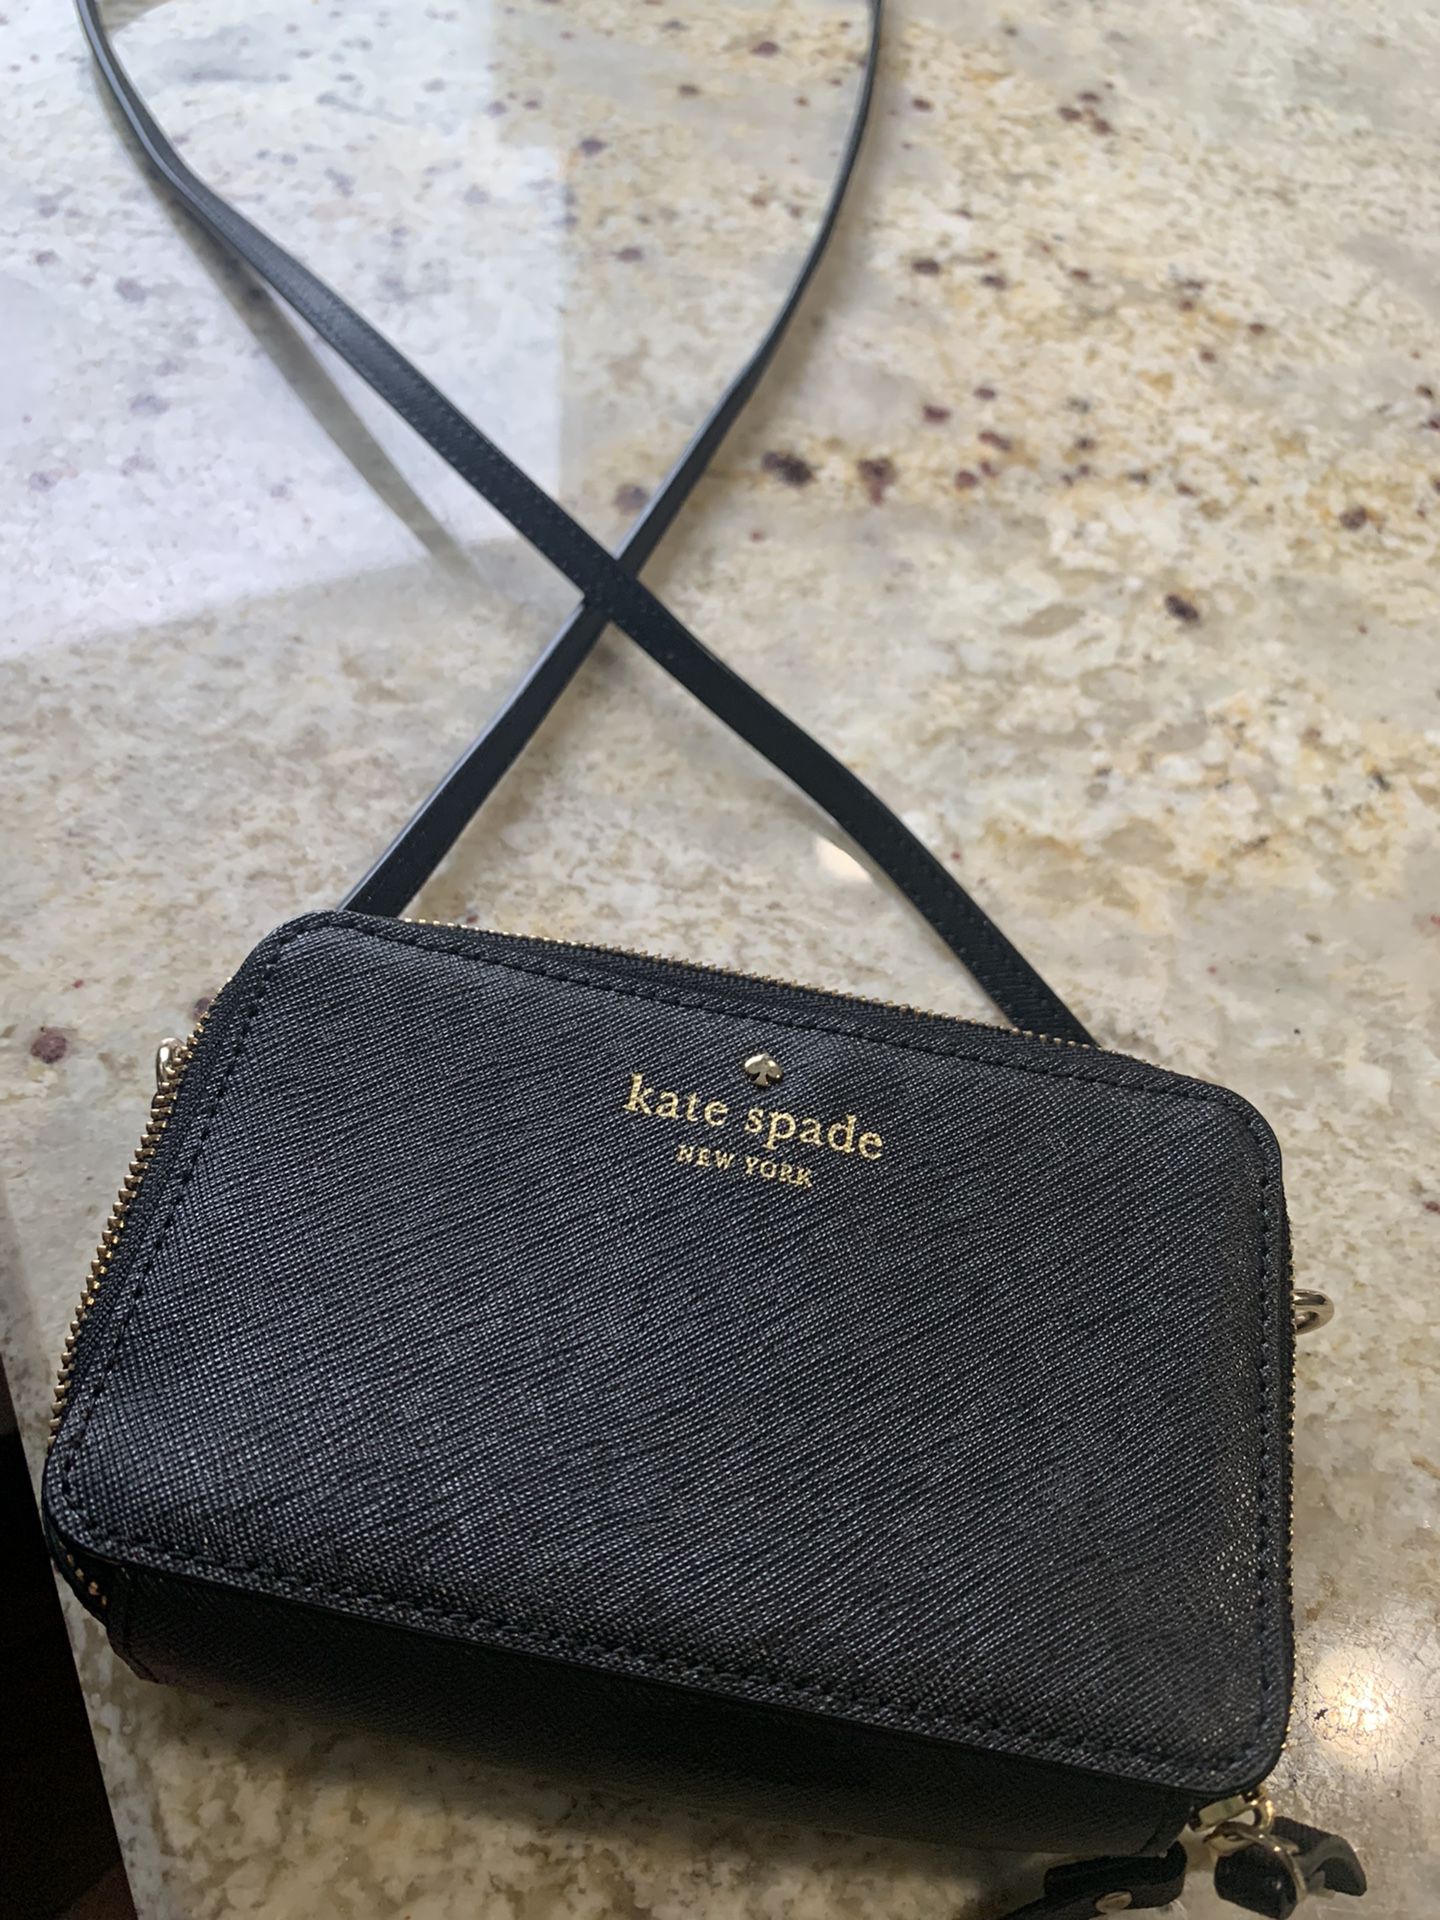 Kate Spade Sienna Crossbody Bag for Sale in Mount Prospect, IL - OfferUp